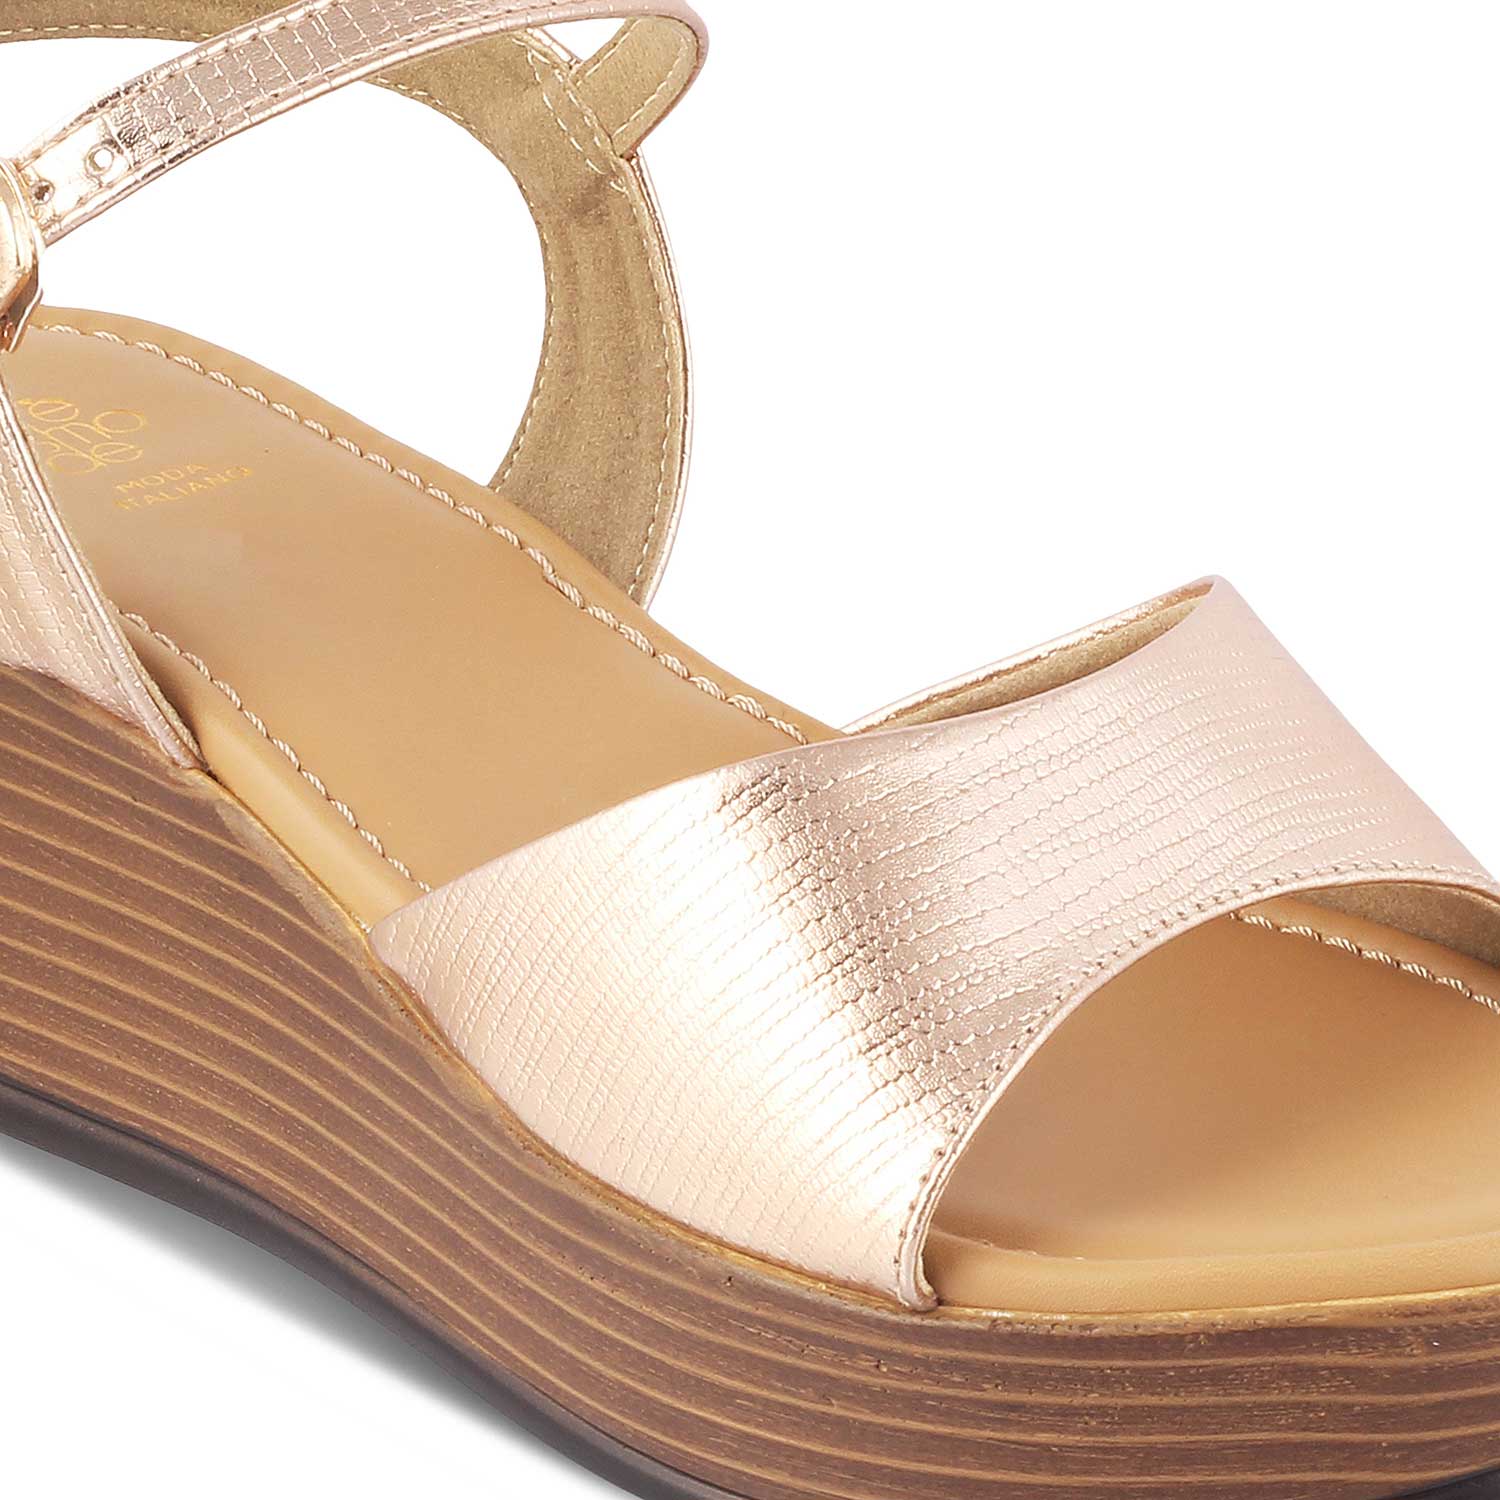 The Cannes Champagne Women's Dress Wedge Sandals Tresmode - Tresmode